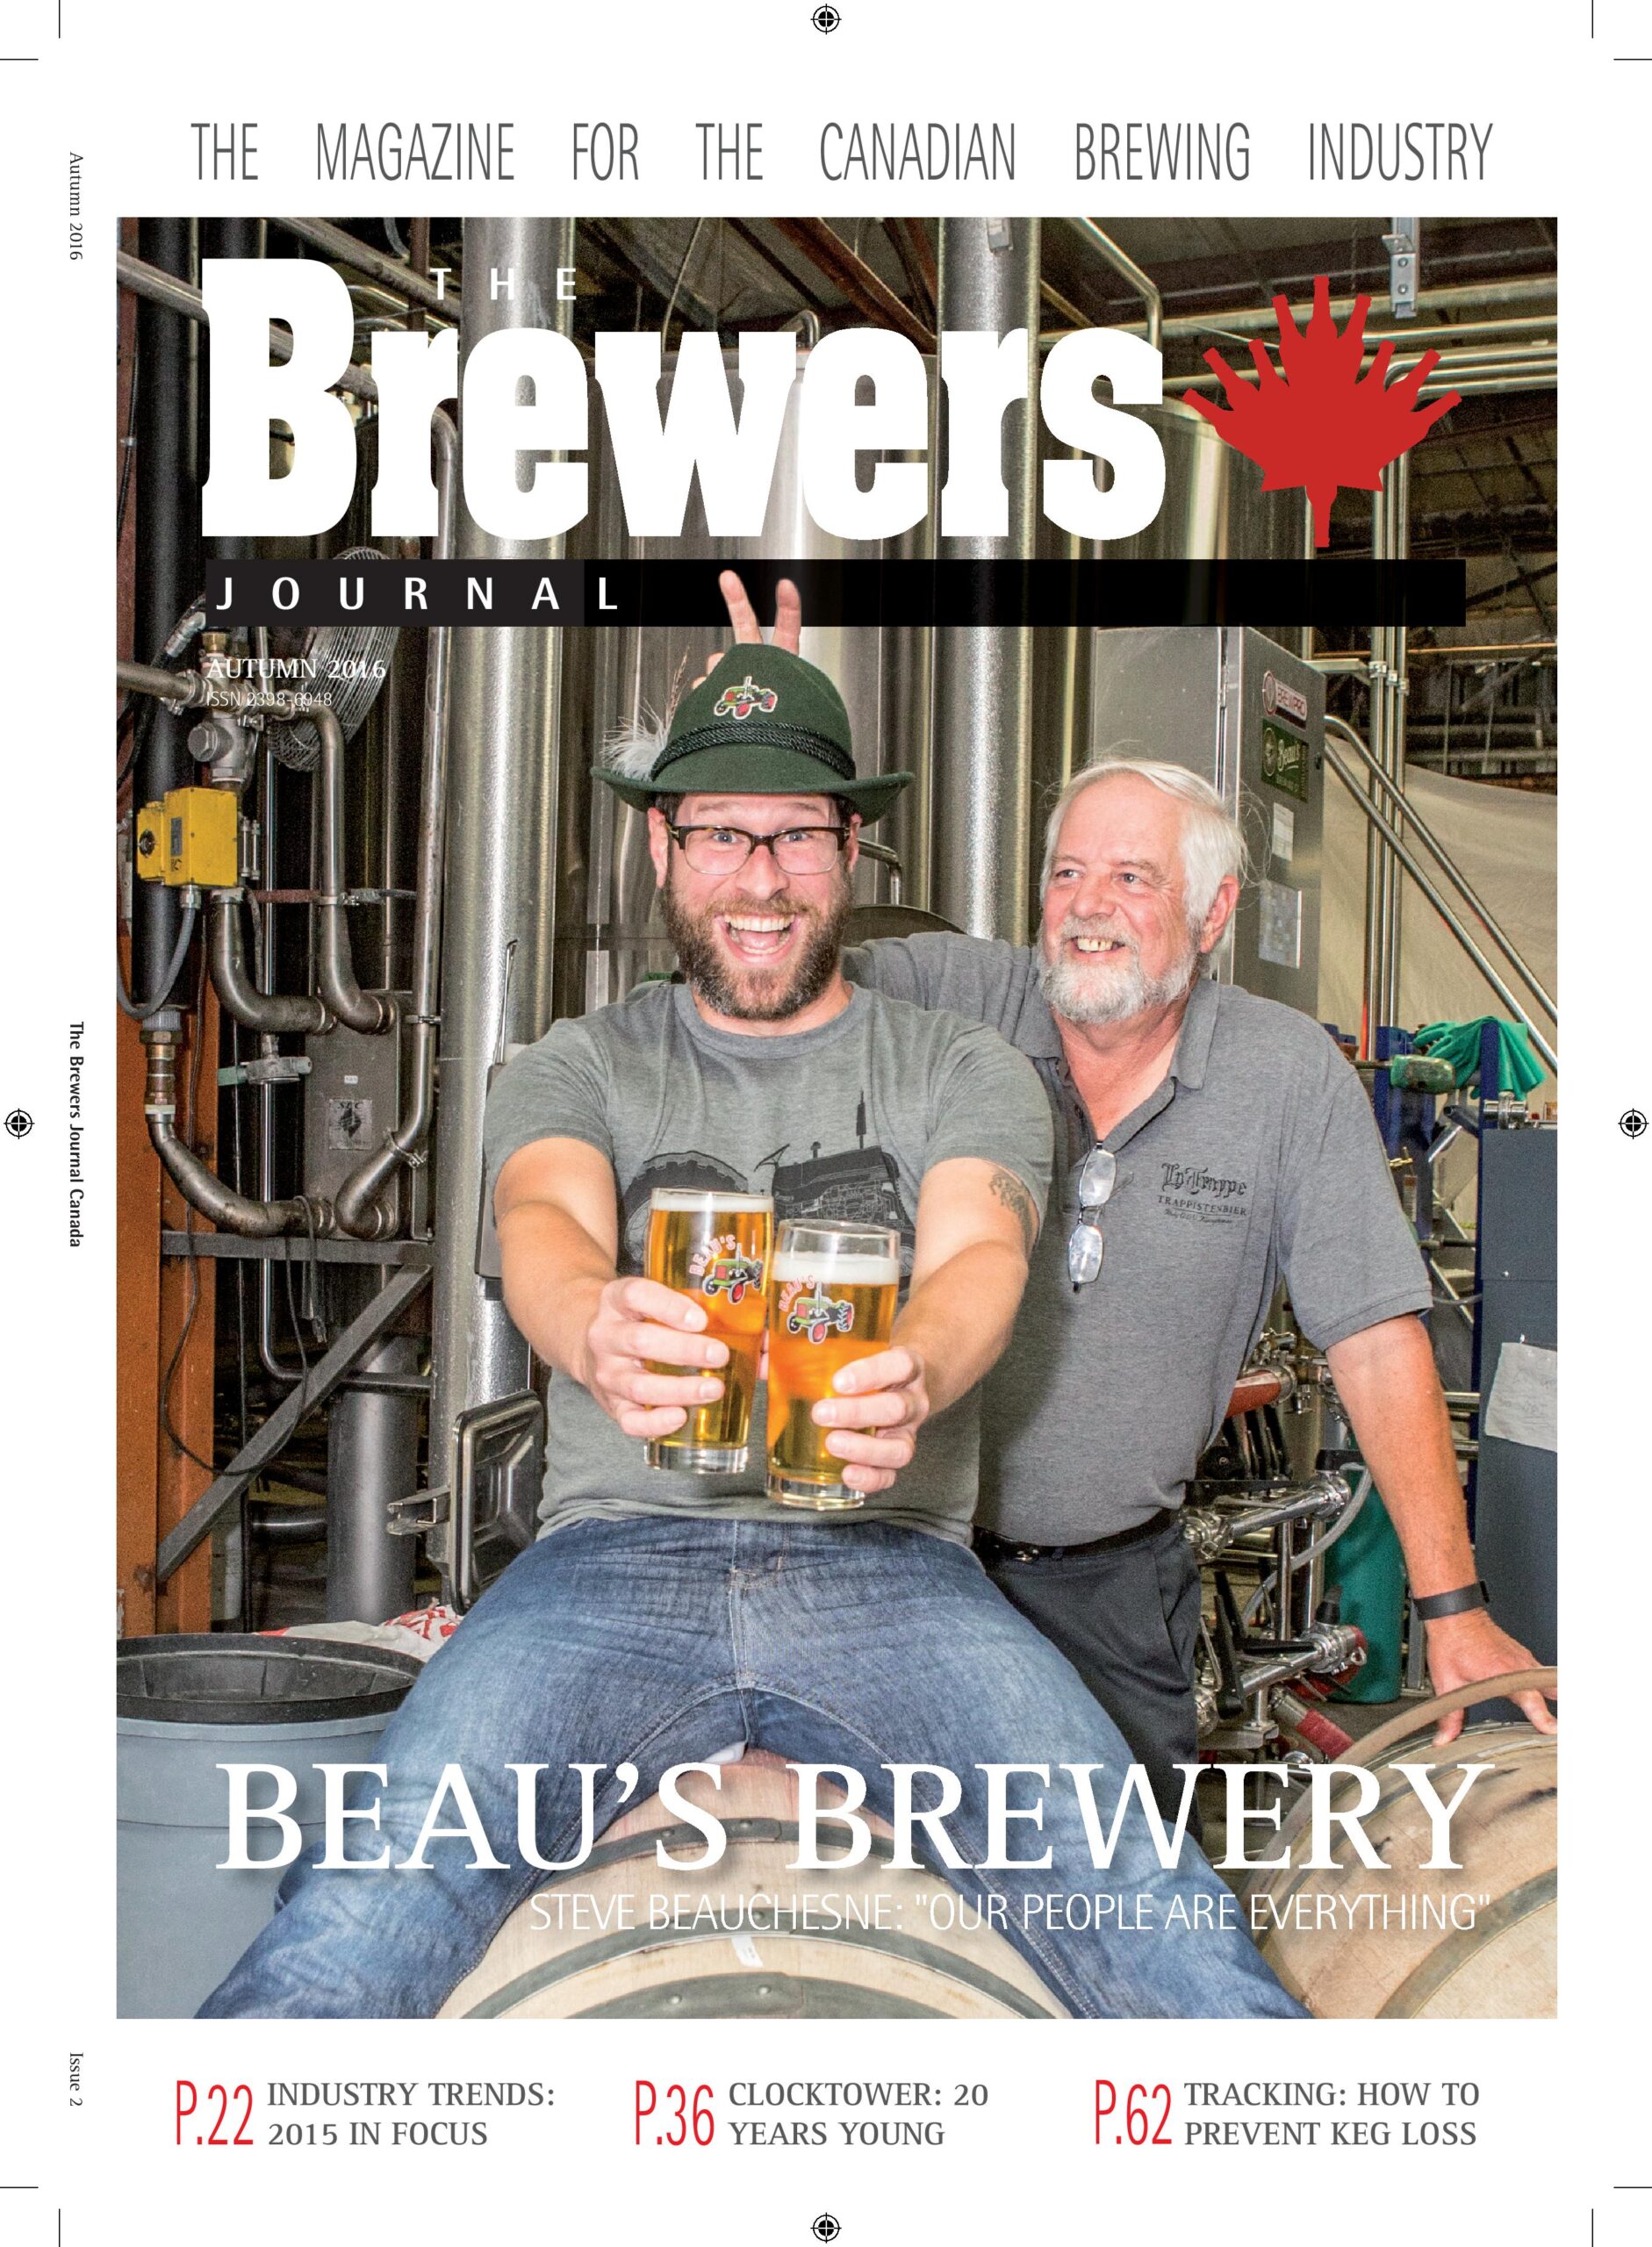 Nameless-Productions© Brewers-Journal-Canada-Fall 2016